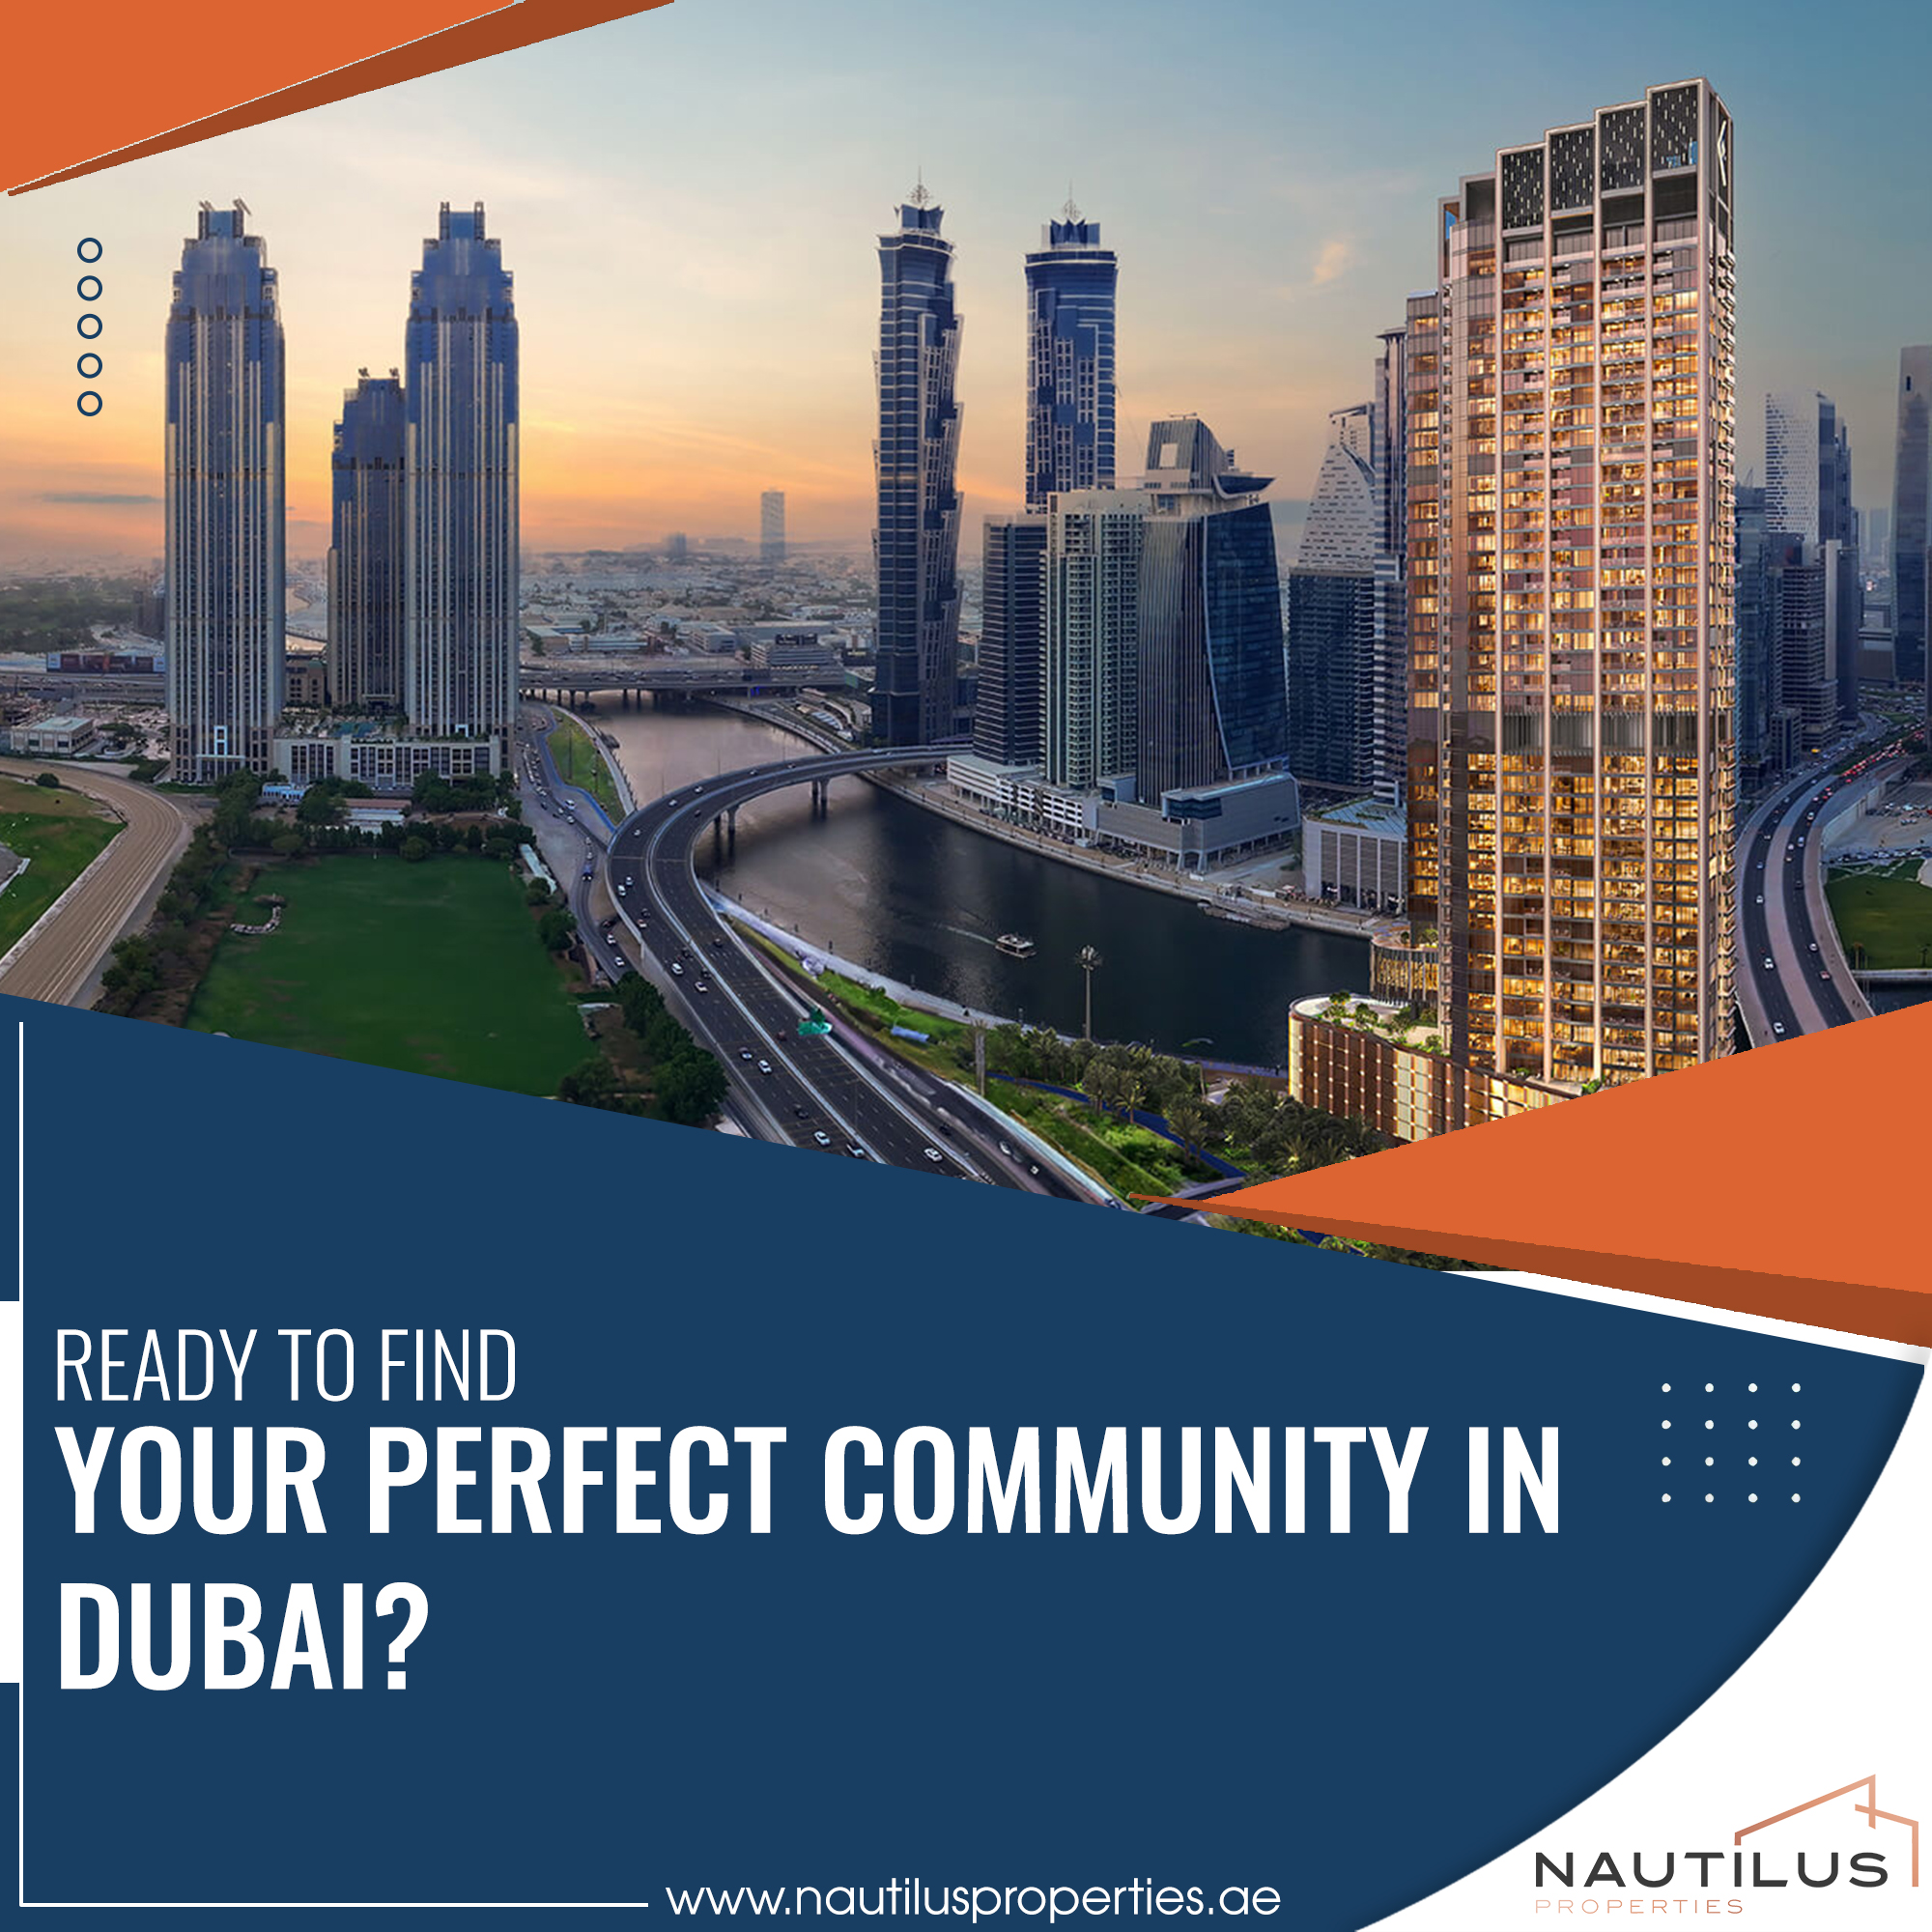 Modern skyline of a vibrant community in Dubai with high-rise buildings and urban infrastructure.